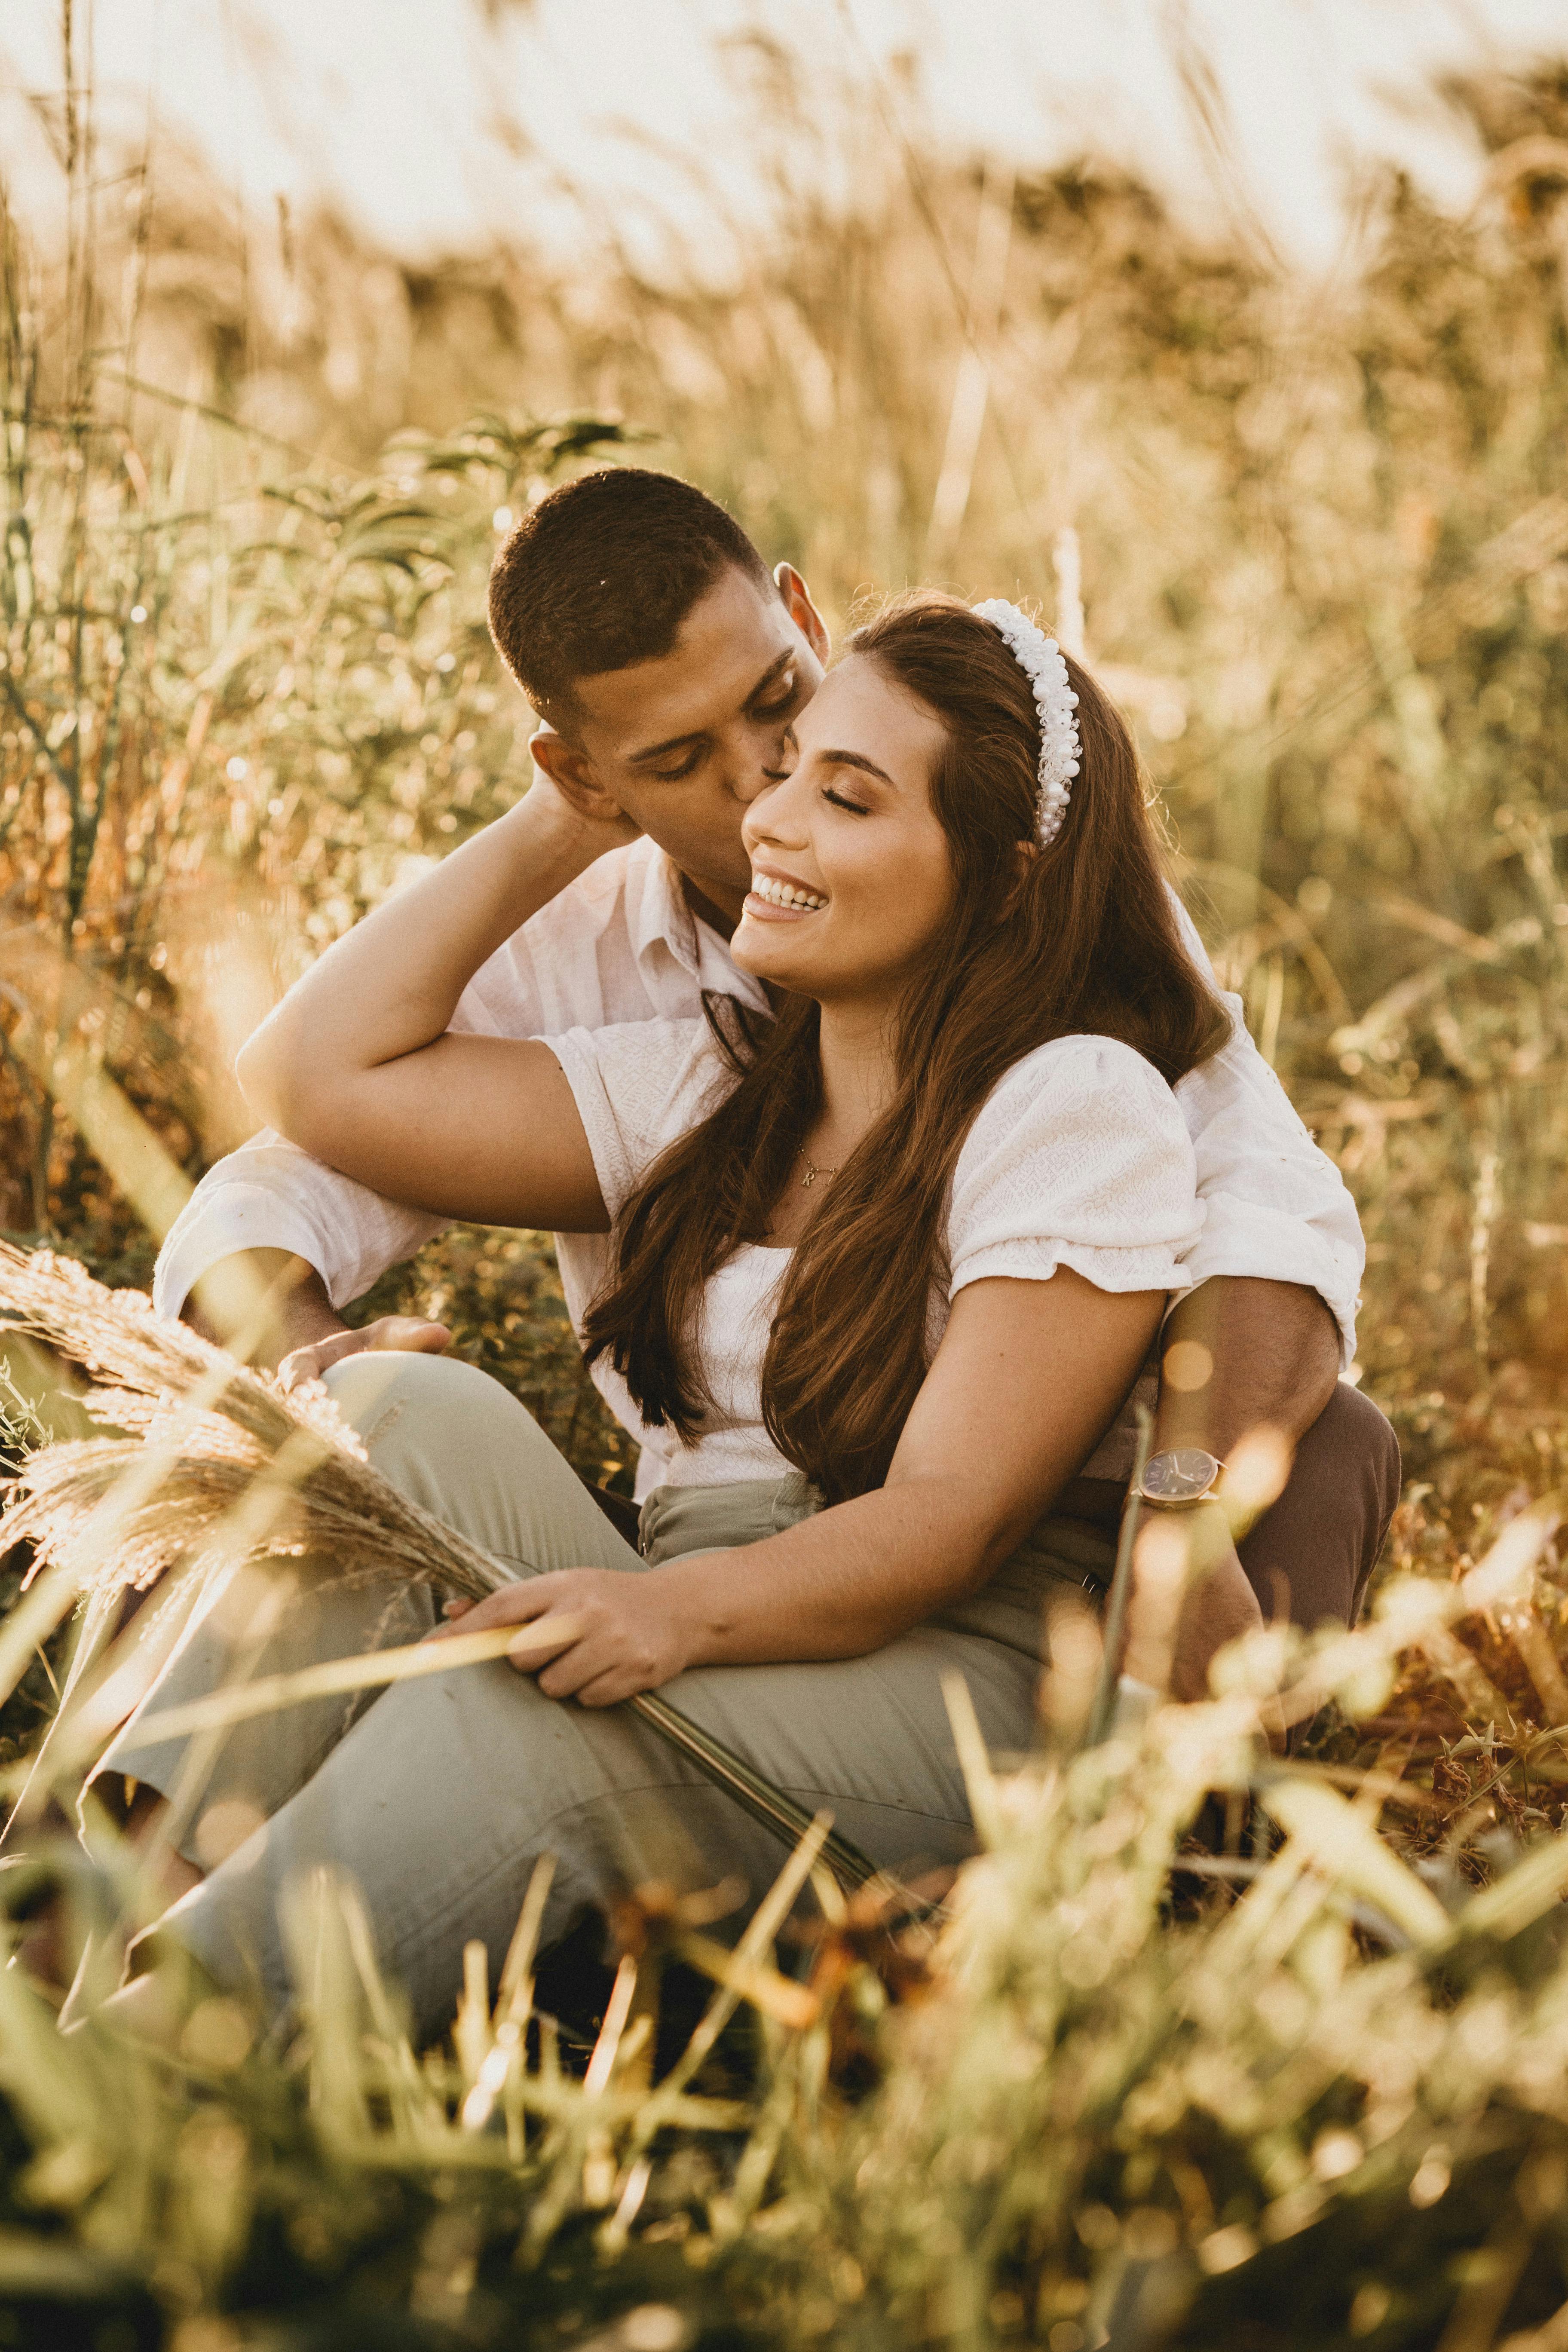 Bf and Gf Photo Ideas_category_photography - Lemon8 Search